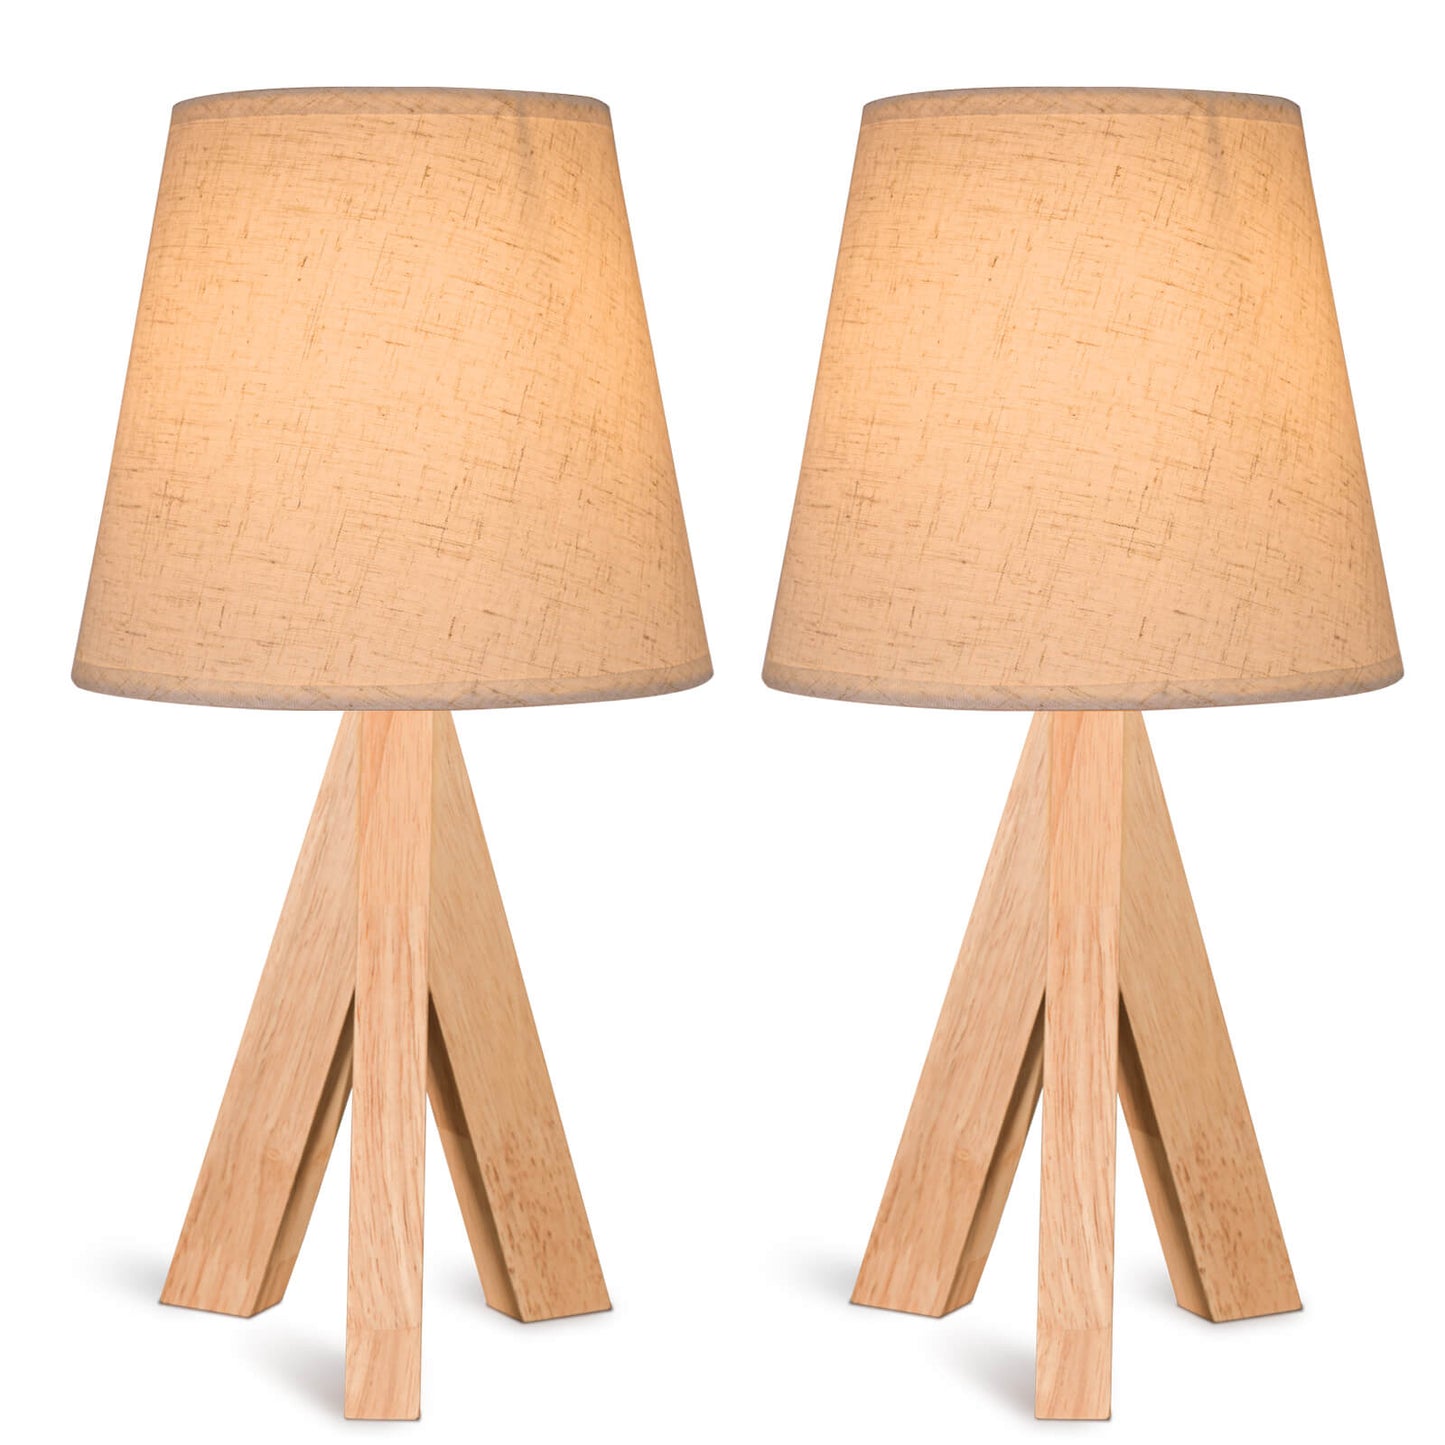 Porseme Bedside Table Lamps Wooden Tripod Small Night Lamps with Linen Shade Modern Side Lamp for Girl Room,Reading Room Nursery -Set of 2(E12 LED Bulb Included)